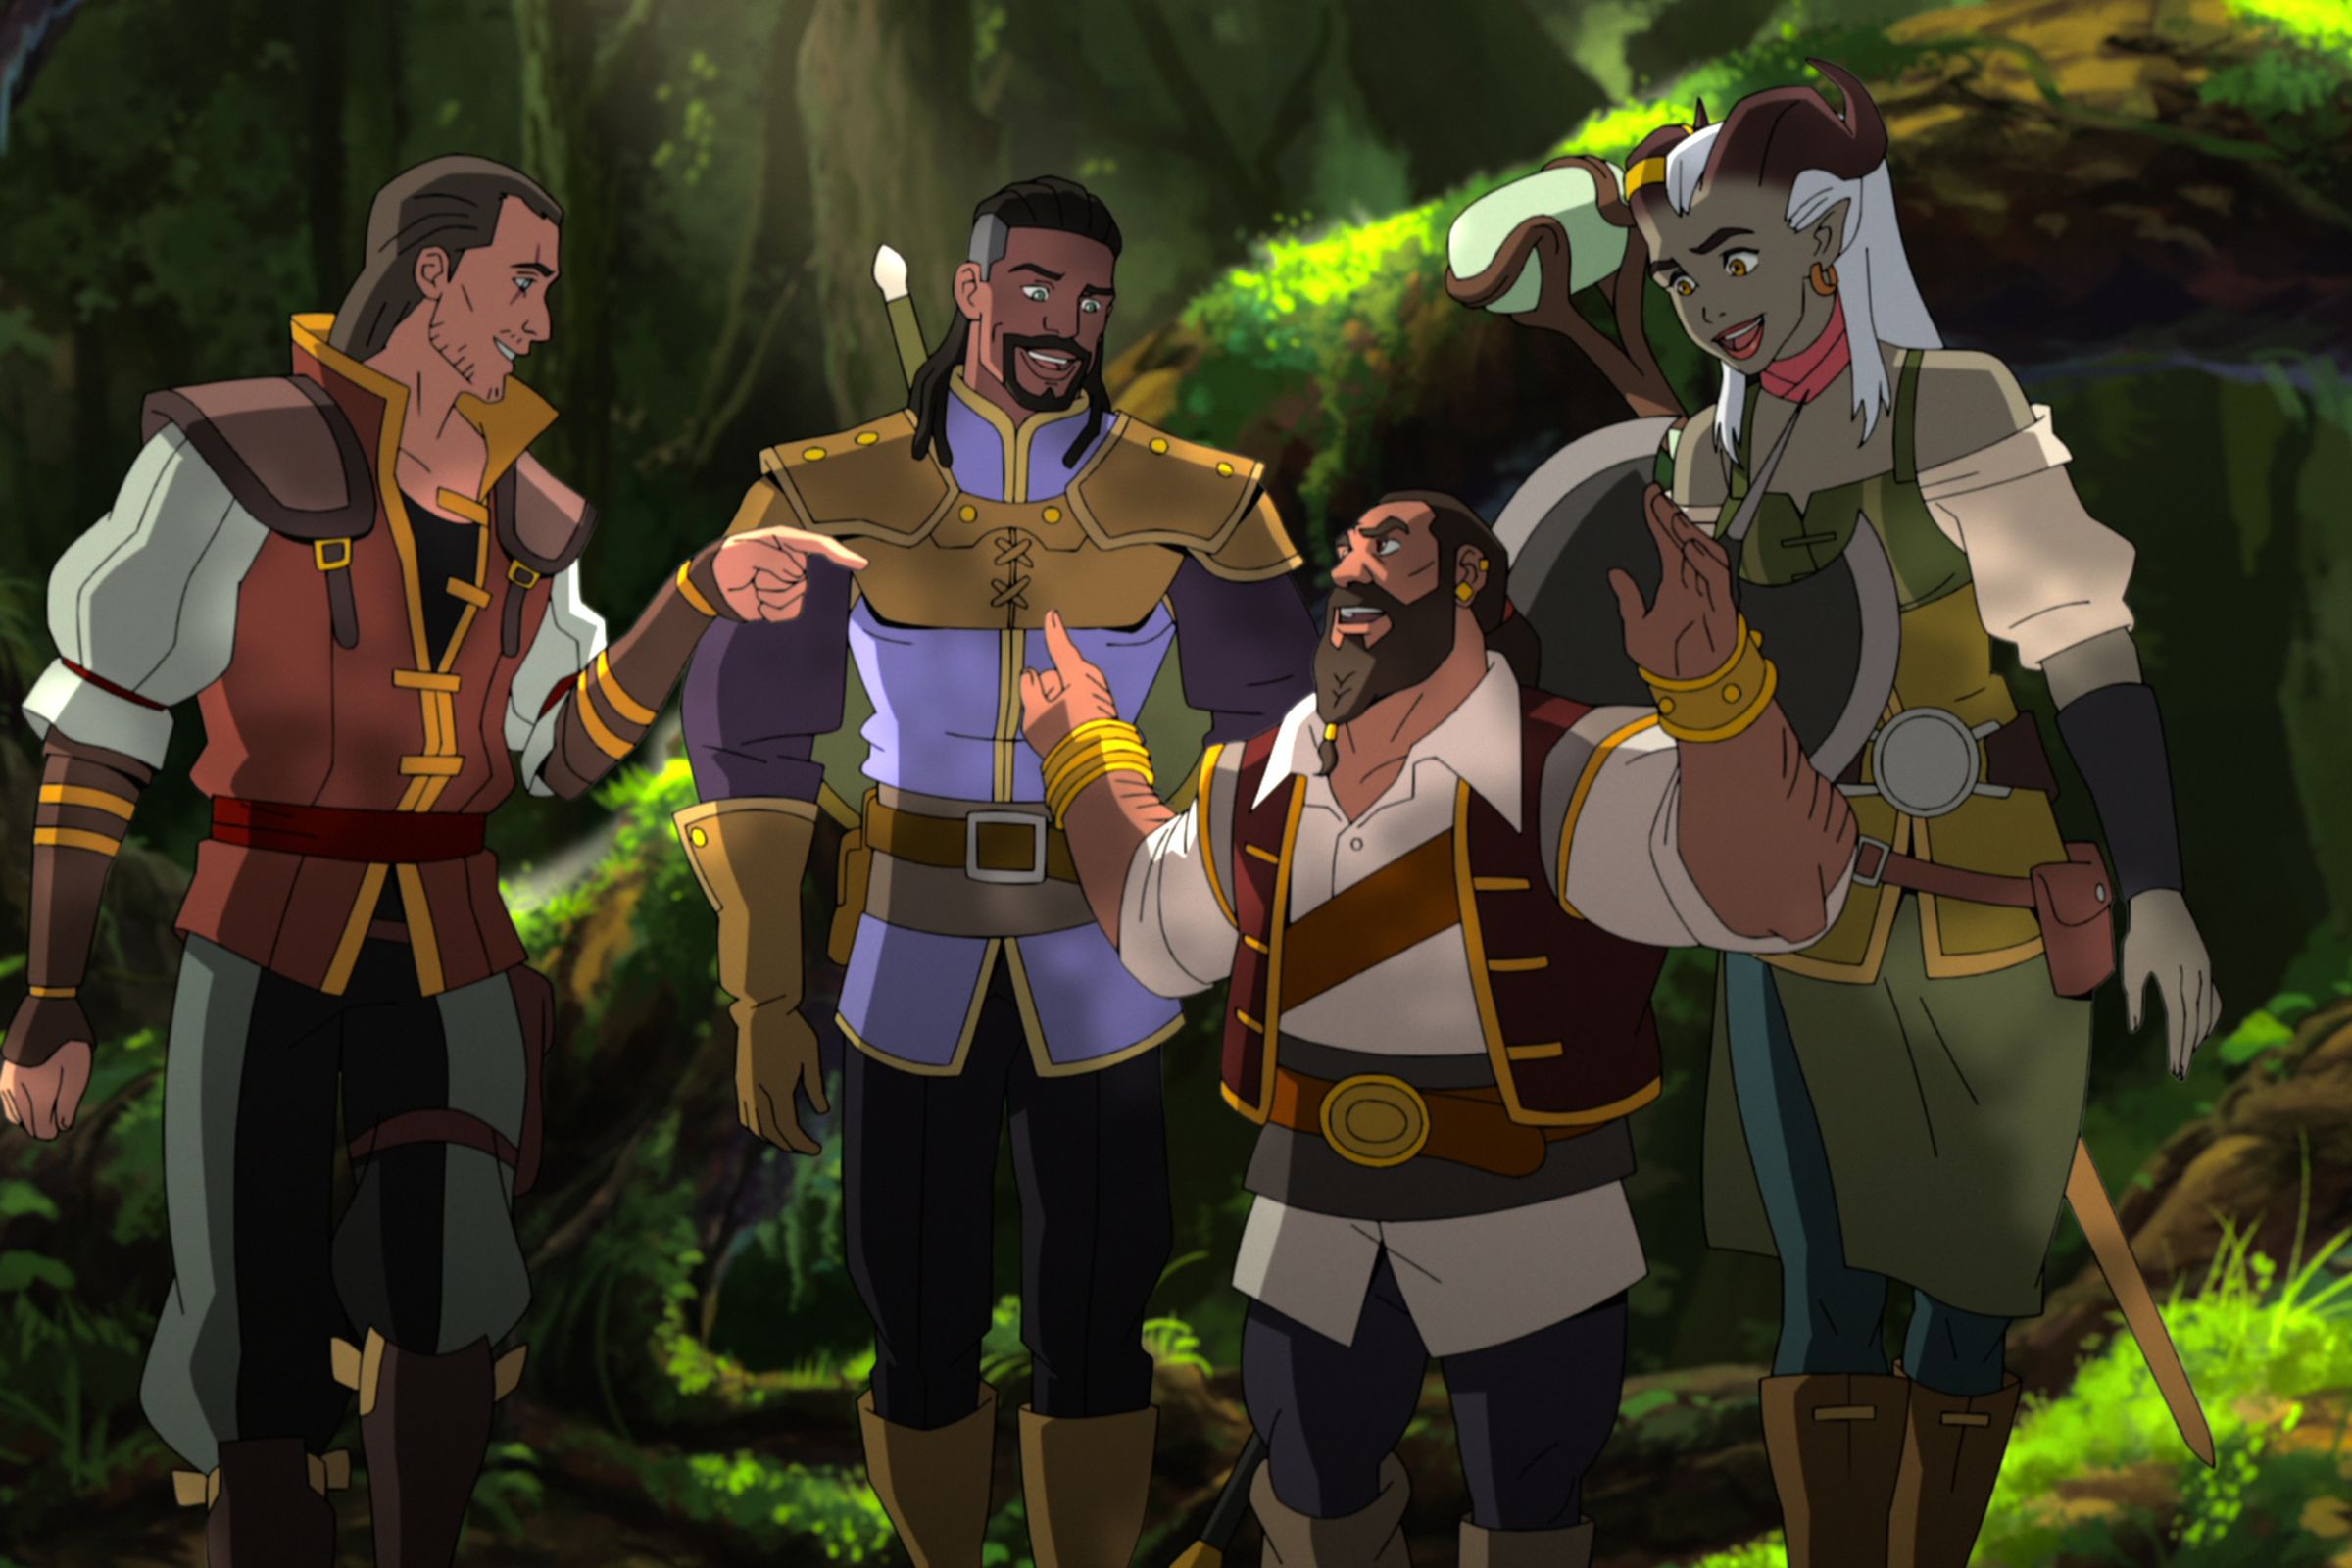 Screenshot from Dragon Age: Absolution featuring a motley crew of adventurers talking happily in a forest